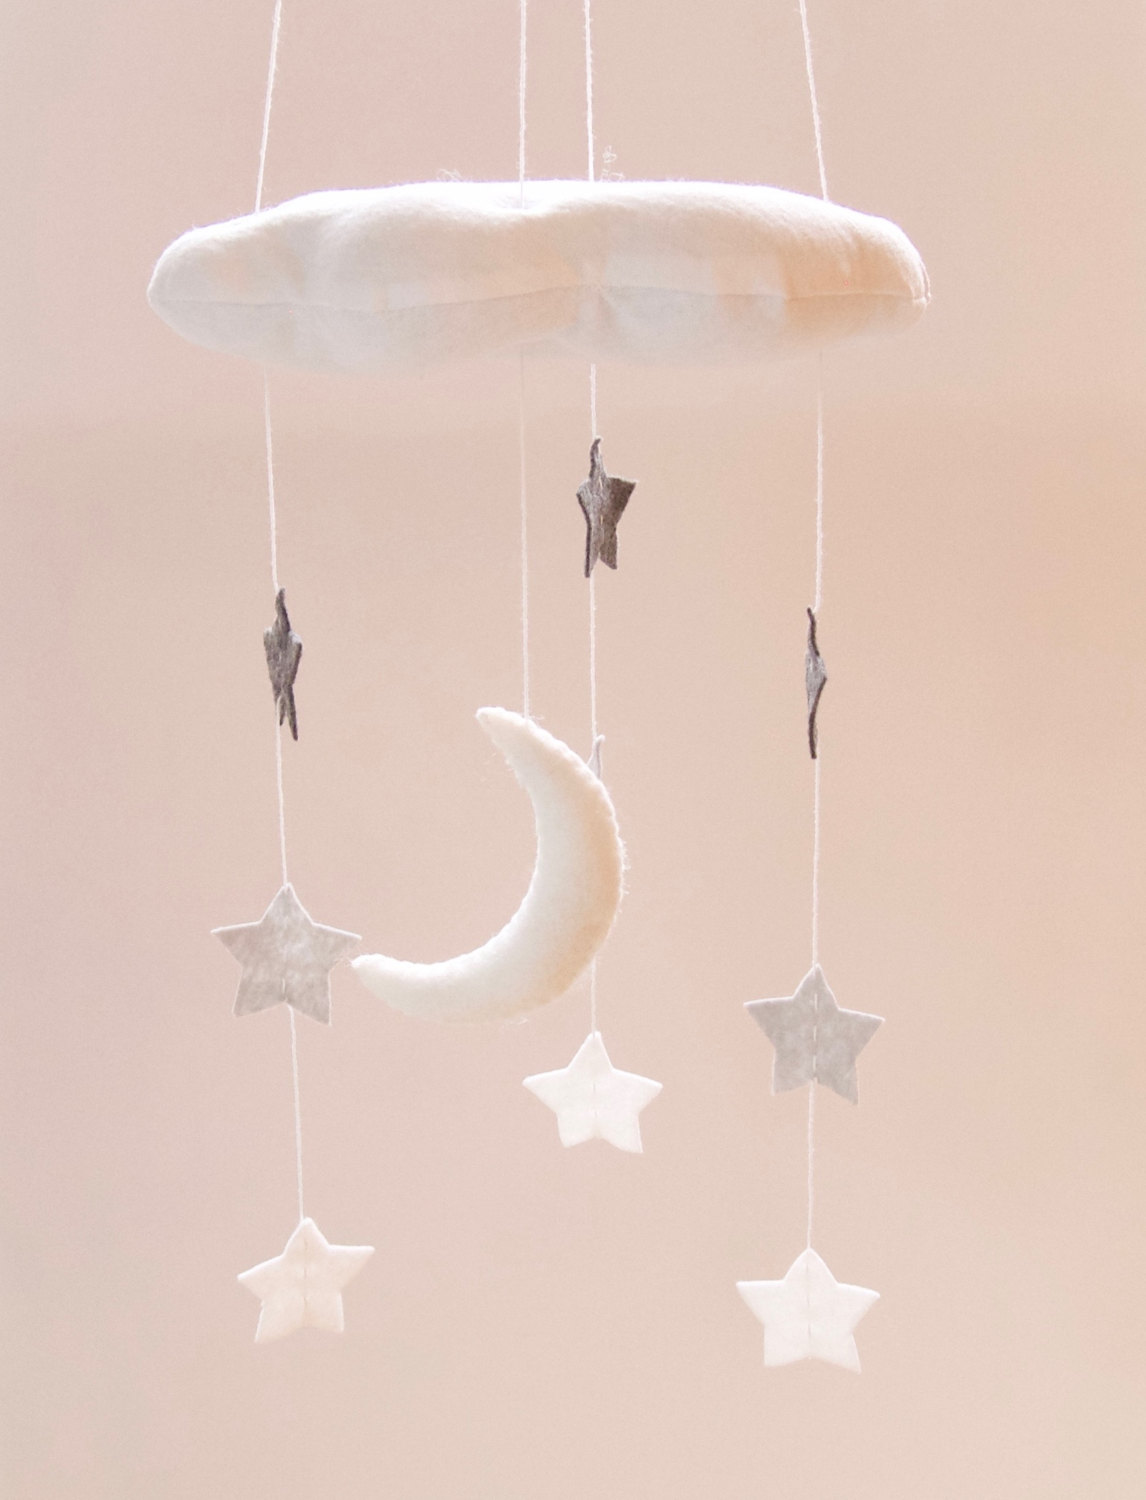 Cloud, moon and star mobile from Etsy shop Blossom Hill